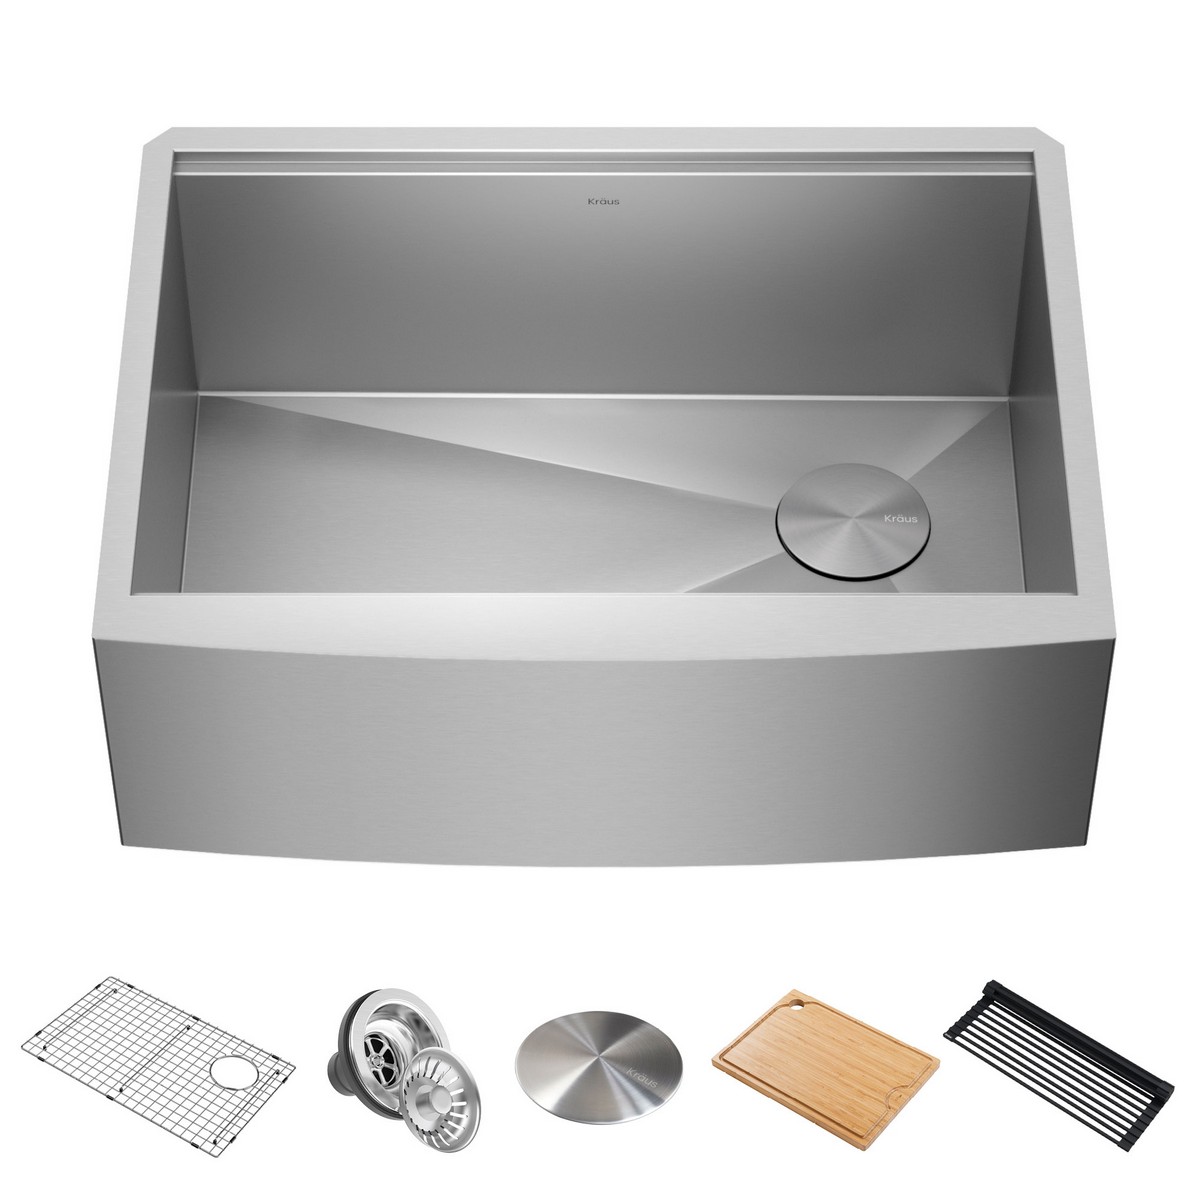 KRAUS KWF210-27 KORE 27 INCH FARMHOUSE APRON FRONT WORKSTATION 16 GAUGE STAINLESS STEEL SINGLE BOWL KITCHEN SINK WITH ACCESSORIES